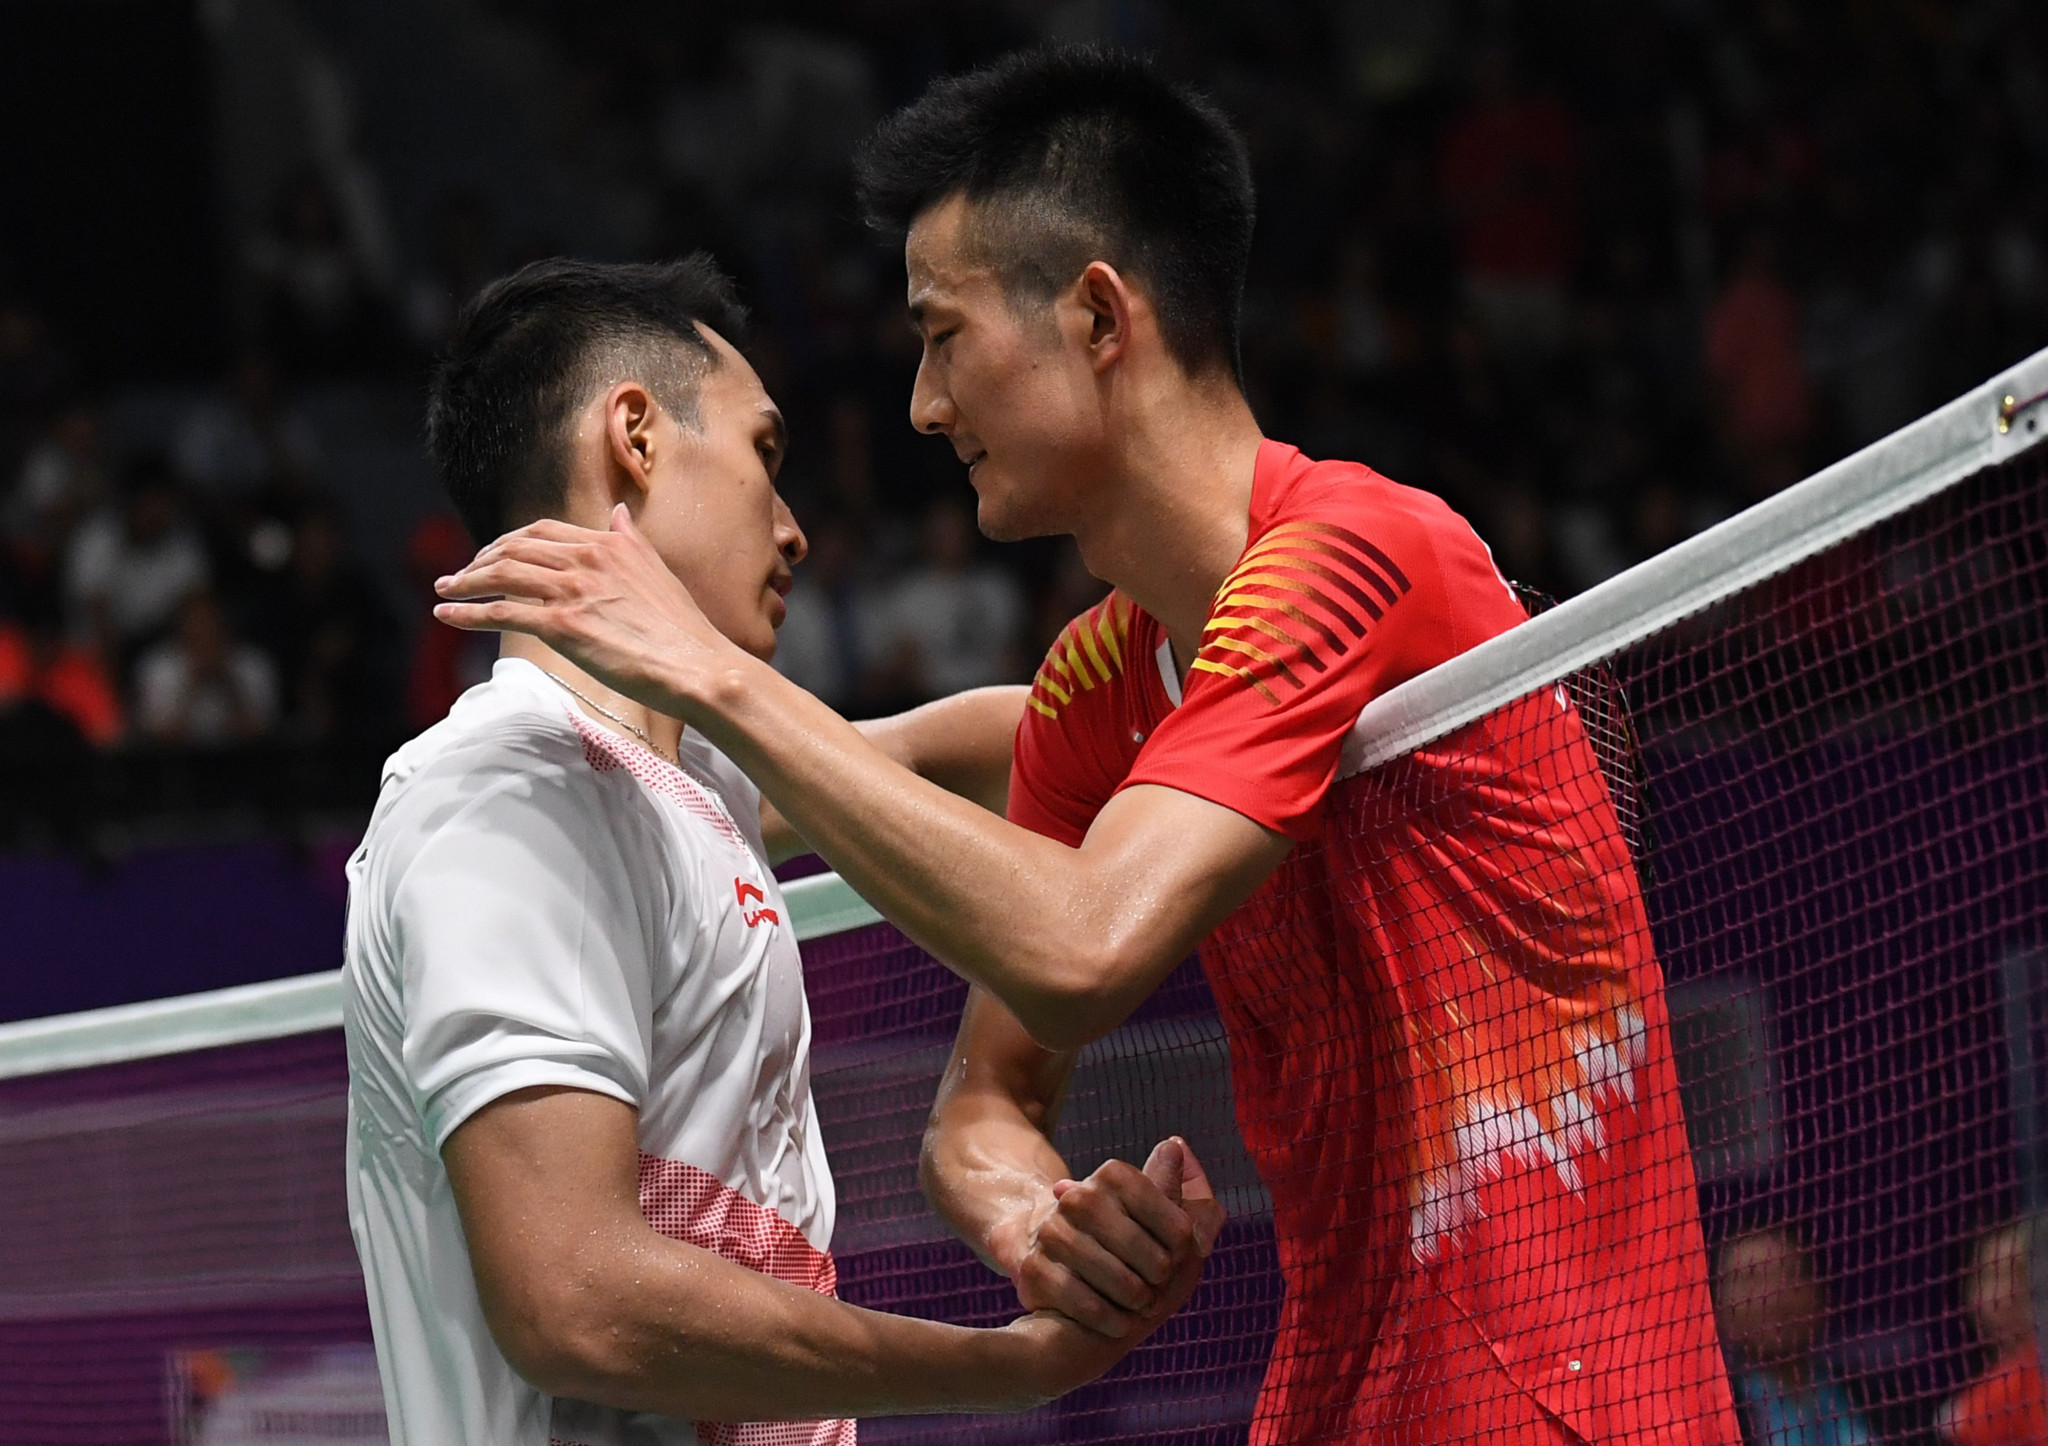 Olympic champion Chen Long beat Jonatan Christie to help China beat hosts Indonesia in an epic men's team badminton final on day four of the 2018 Asian Games in Jakarta and Palembang ©Getty Images